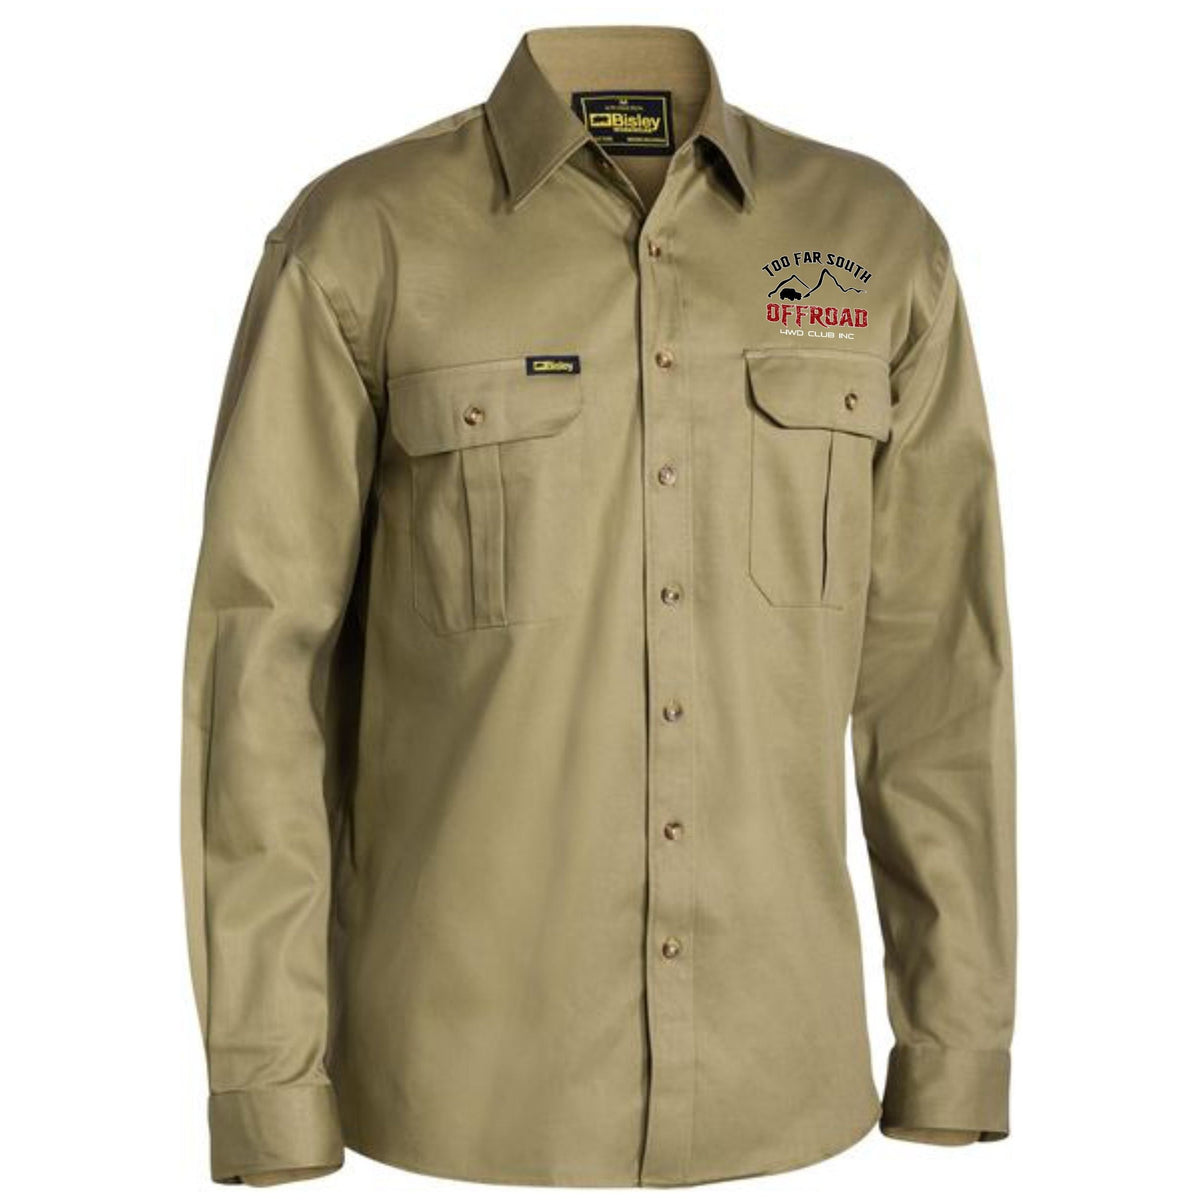 Too Far South Off Road Cotton Drill Shirt